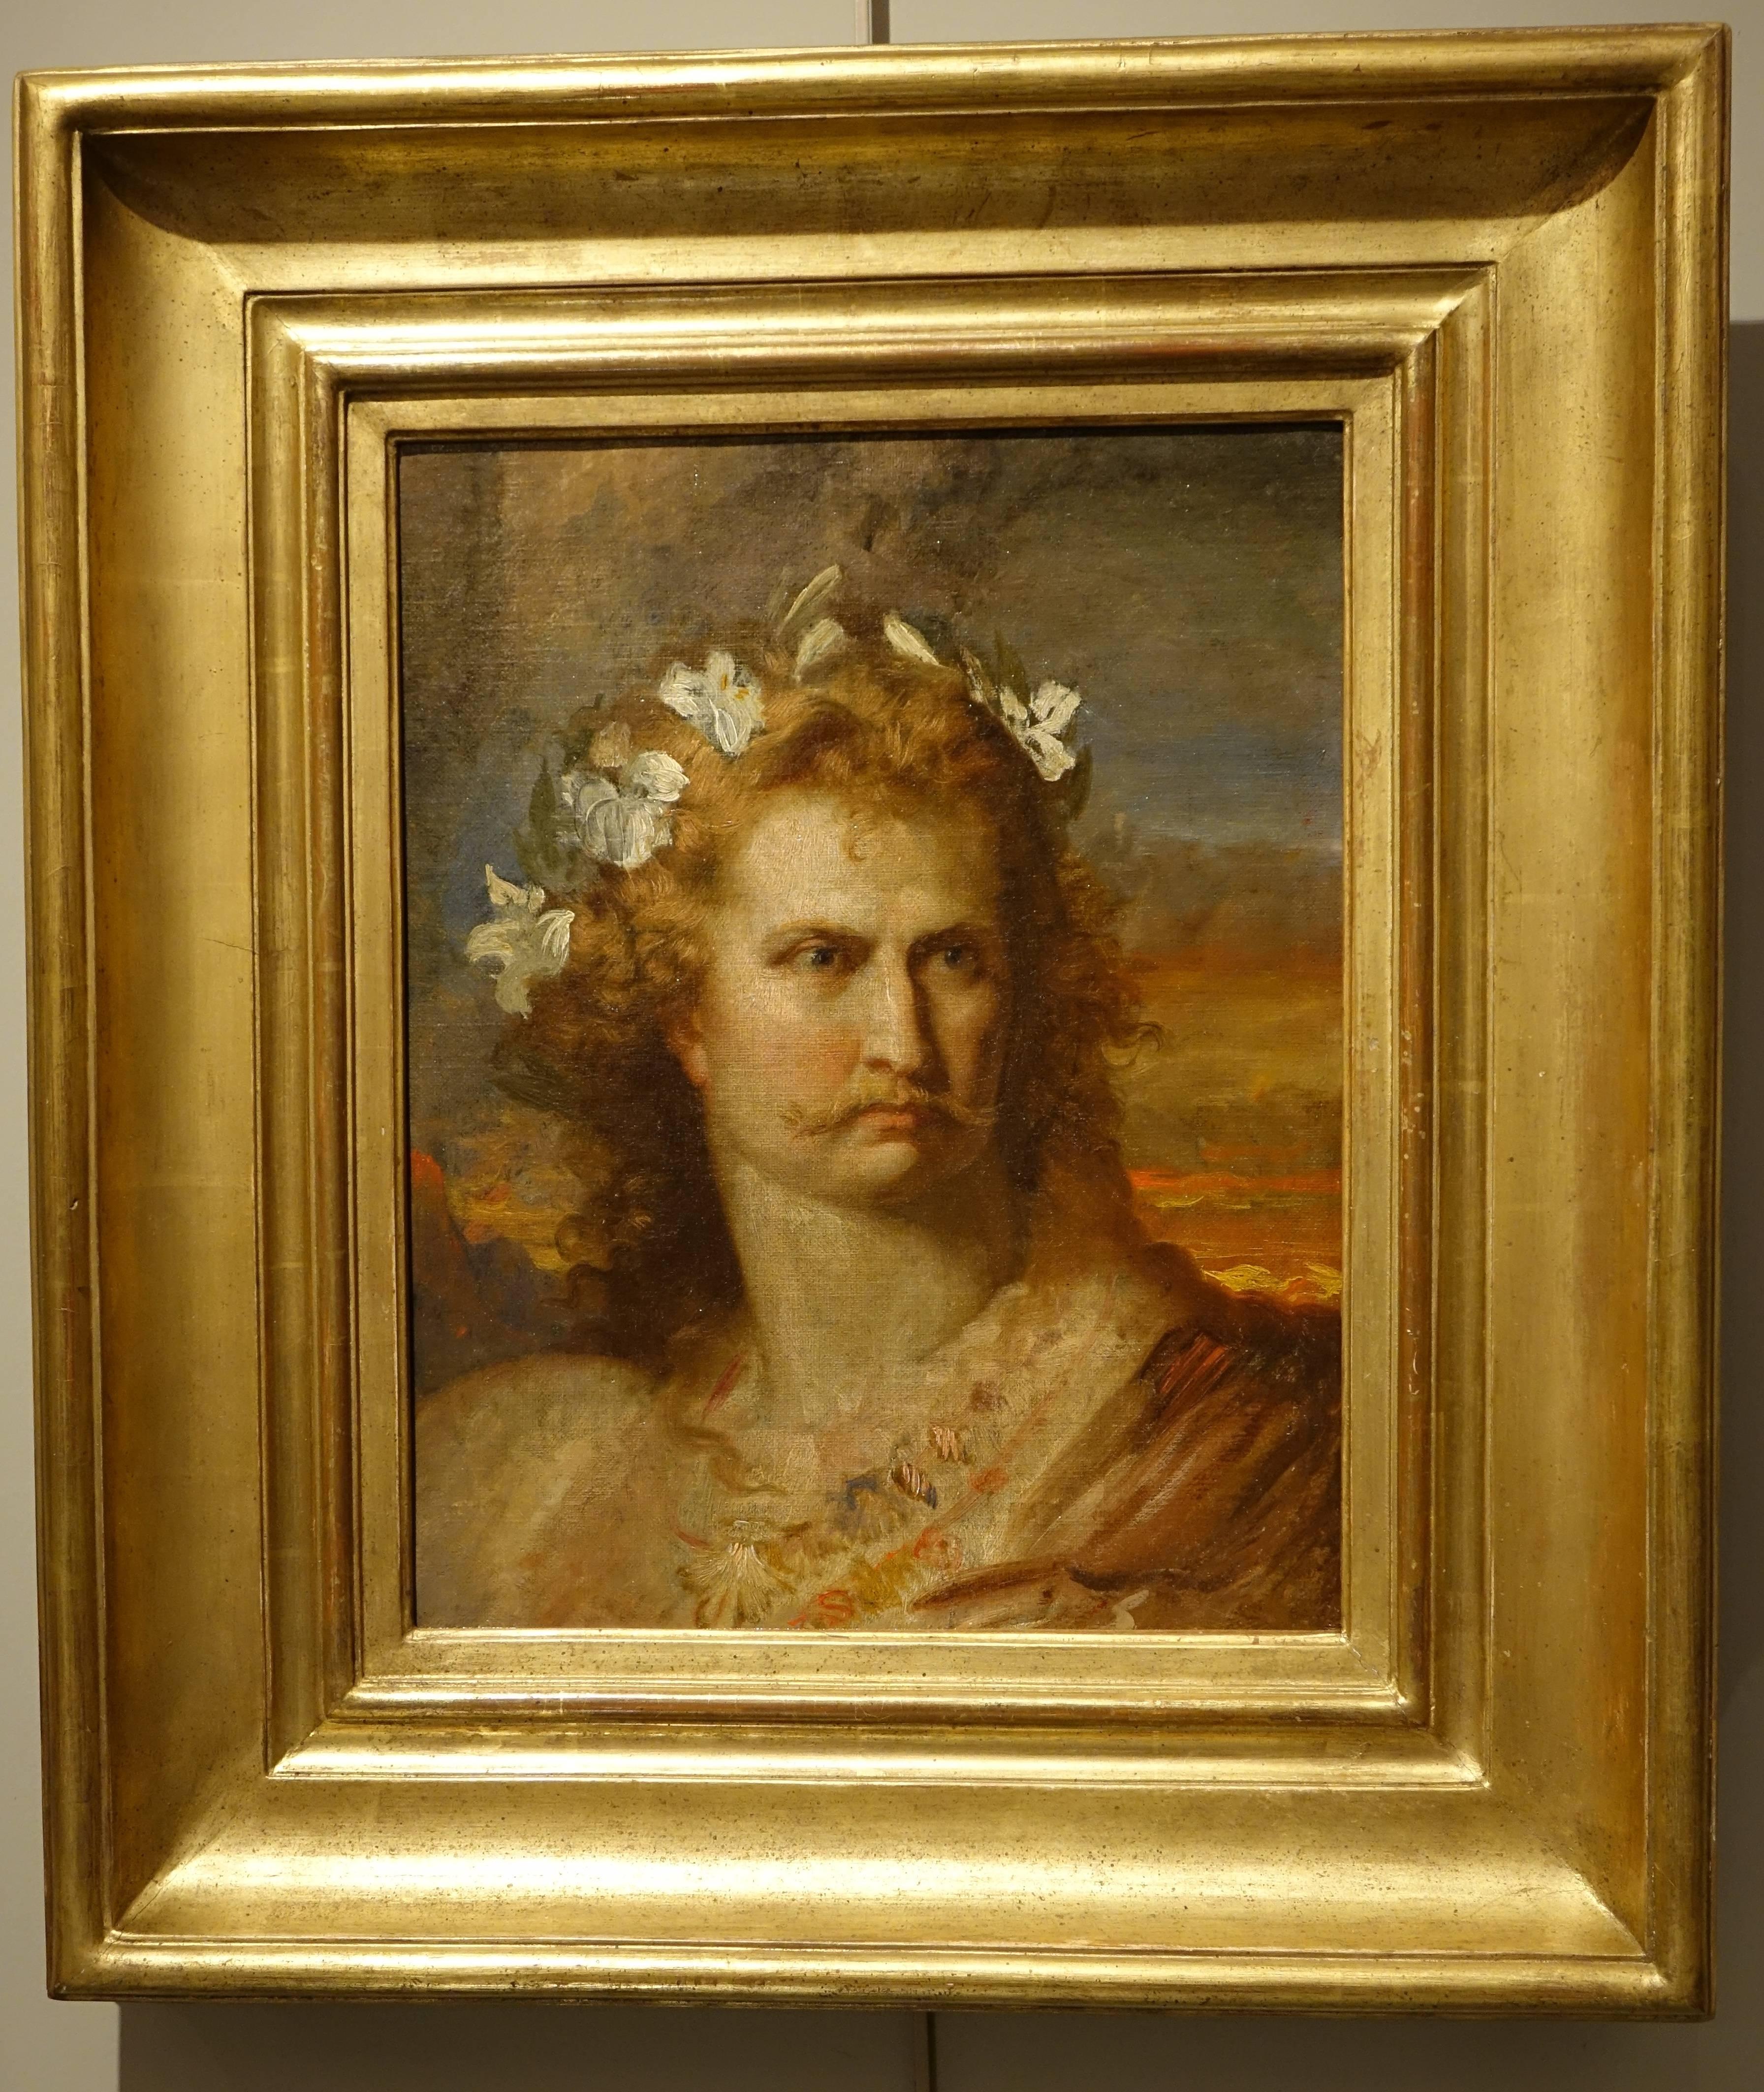 Oil on canvas representing a man with a flower wreath, Vercingetorix?
Vercingetorix was a king and chieftain of the Arverni tribe. He united the Gauls in a revolt against Roman forces during the last phase of Julius Caesar's Gallic Wars.
French